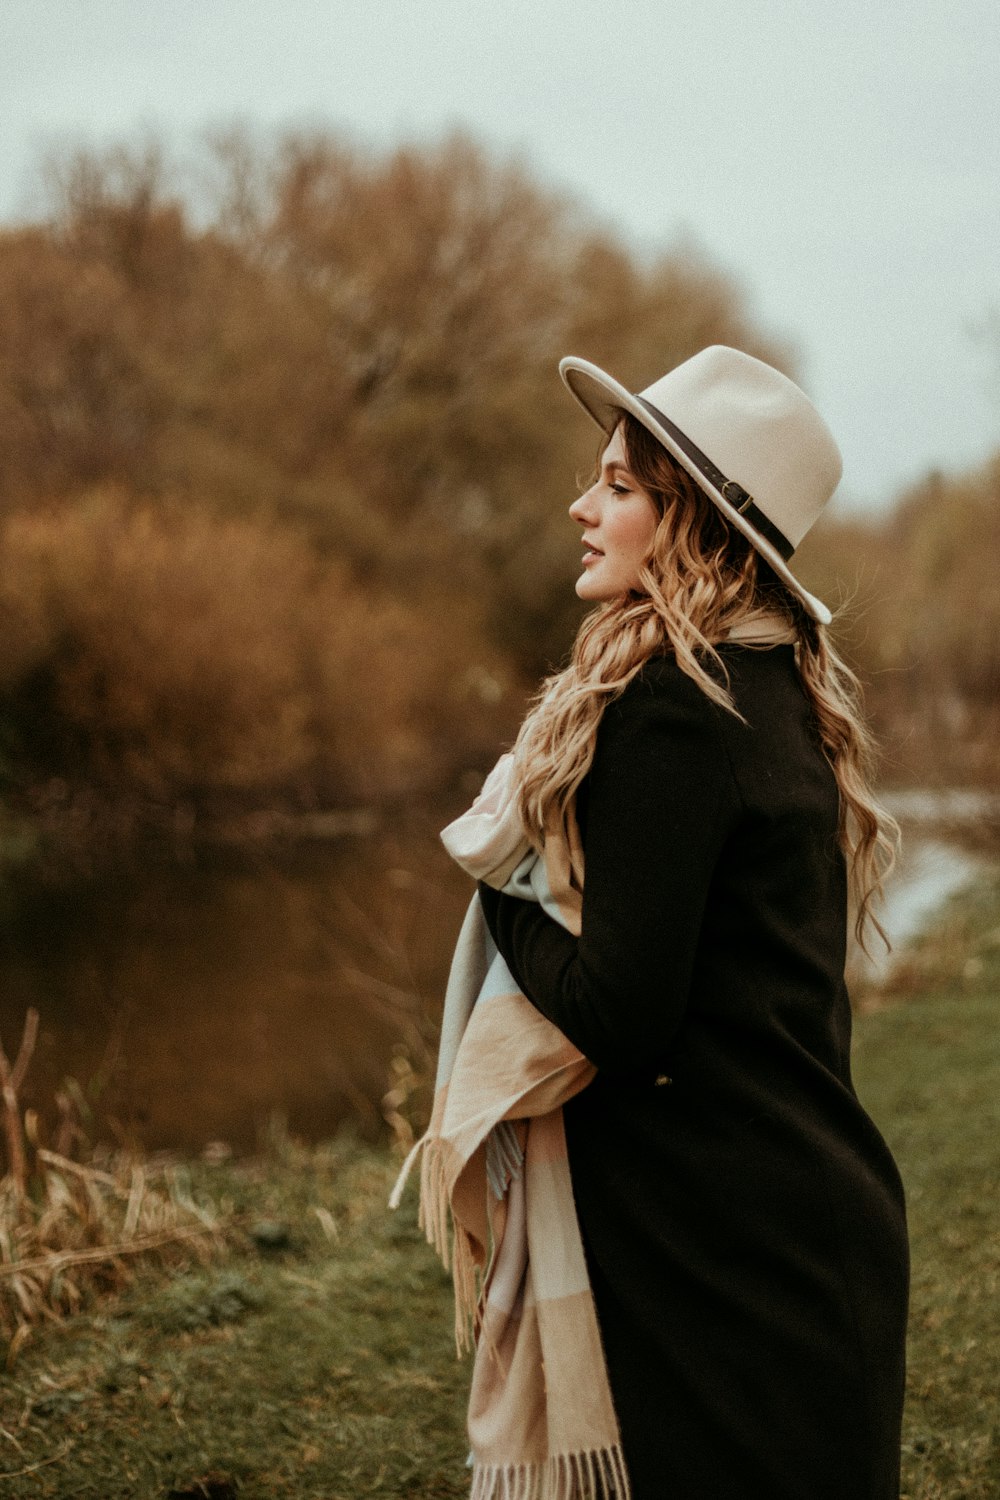 woman in black coat and white sun hat standing on green grass field during daytime